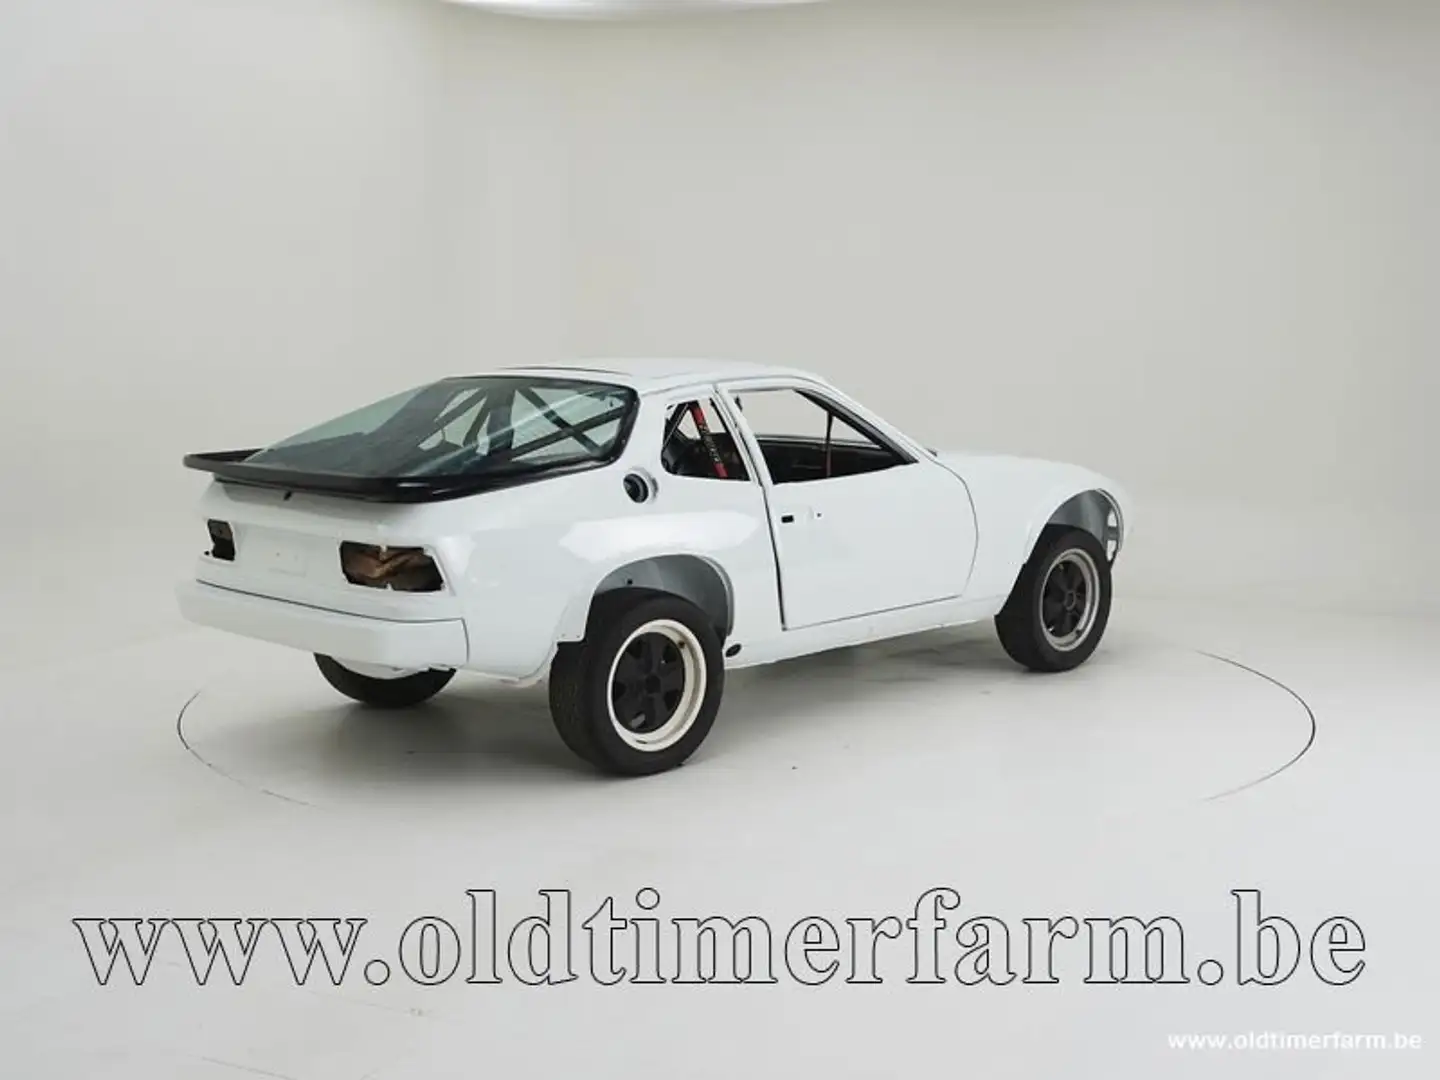 Porsche 924 Rally Turbo Works Project '78 CH0005 Alb - 2